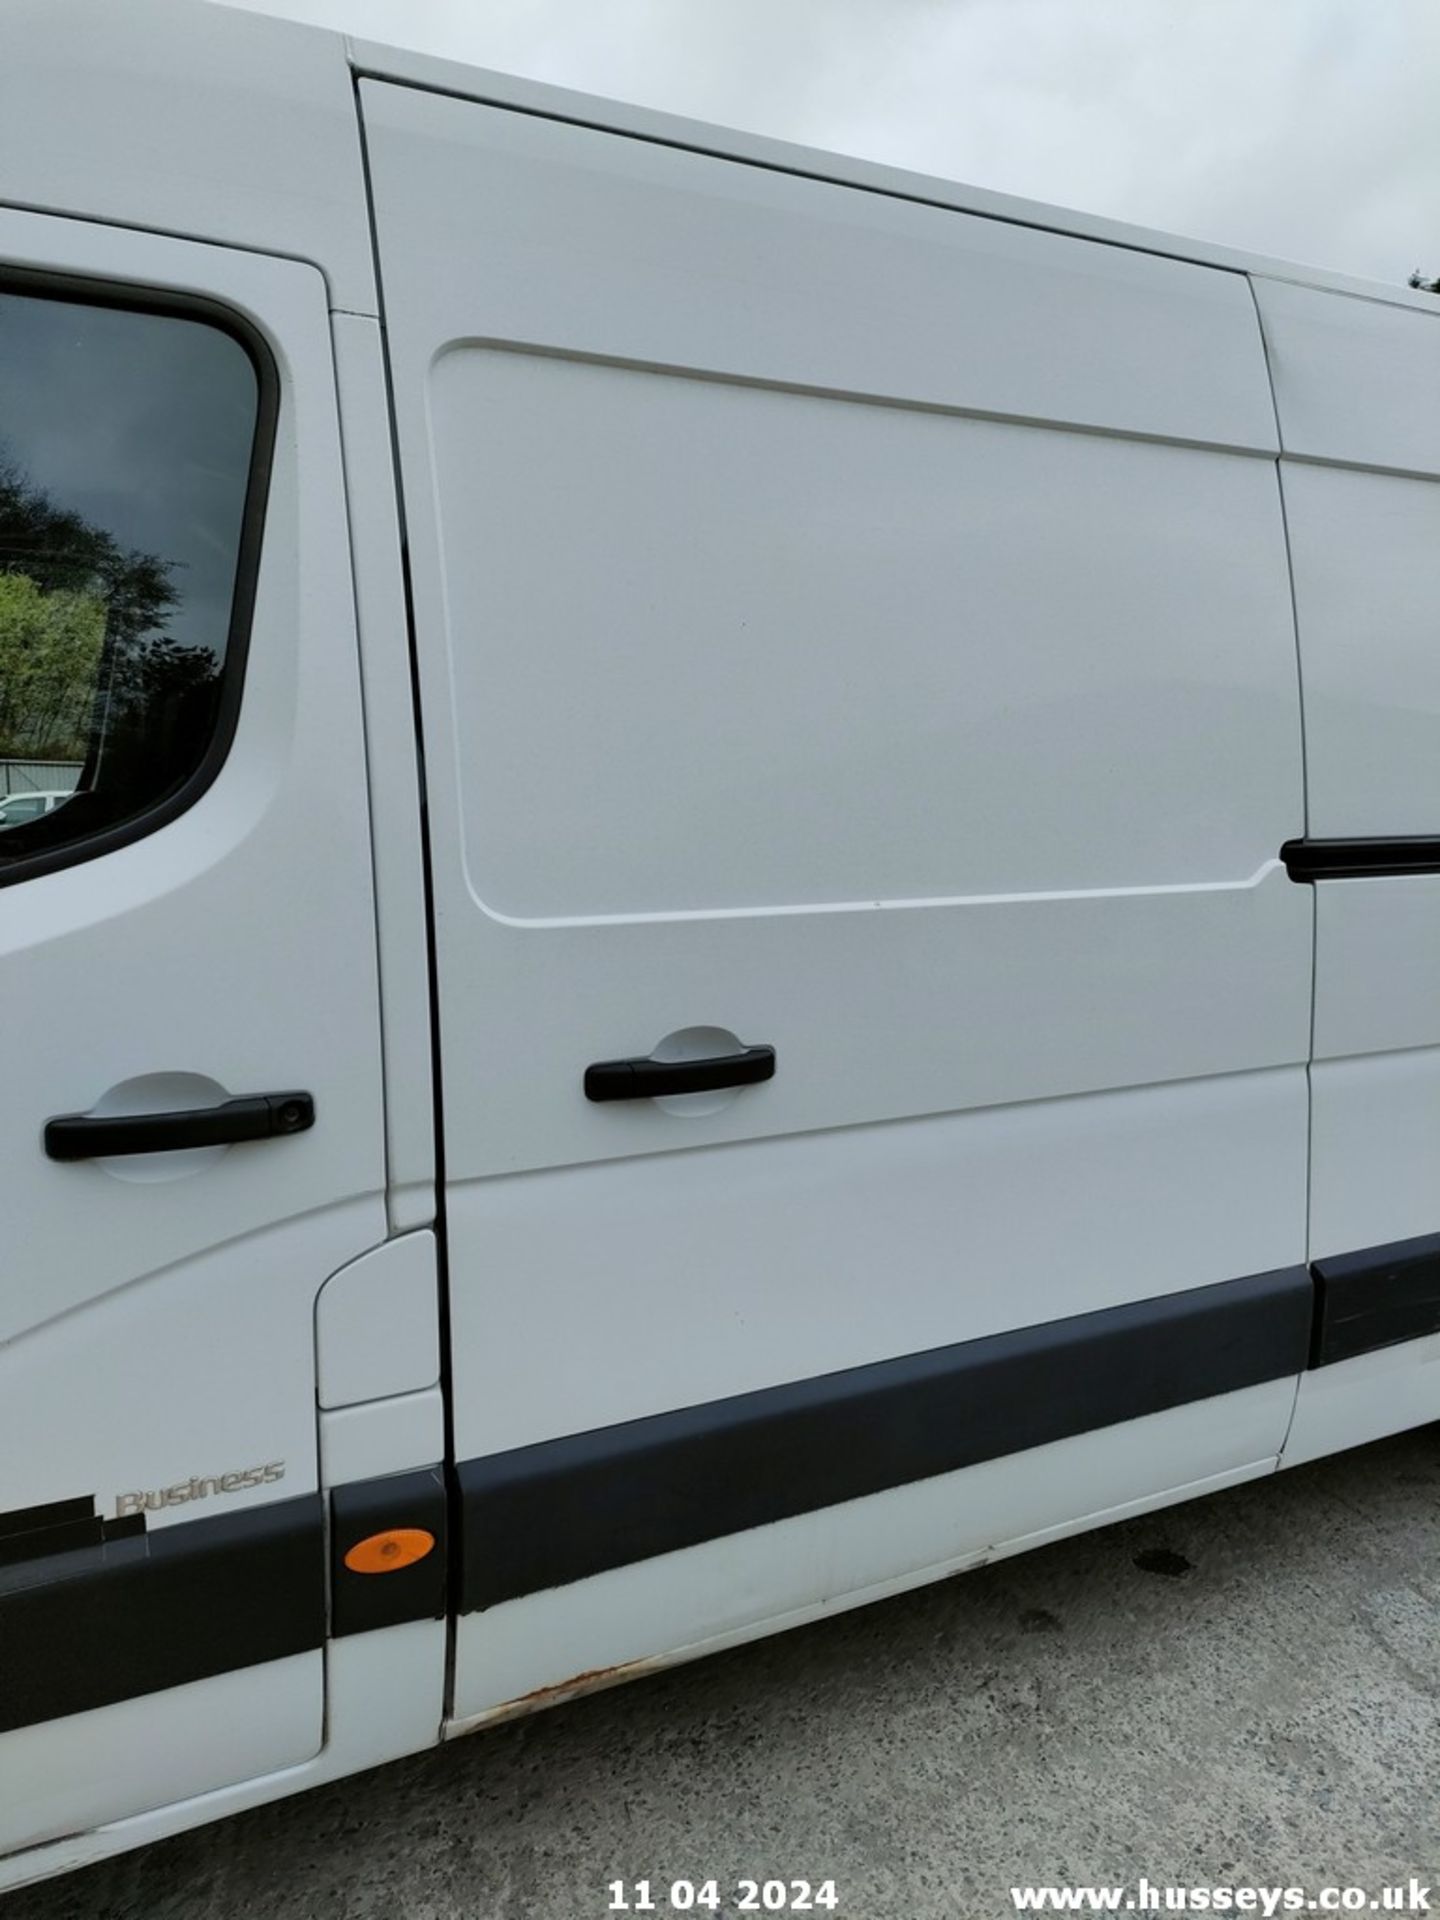 18/68 RENAULT MASTER LM35 BUSINESS DCI - 2298cc 5dr Van (White) - Image 27 of 68